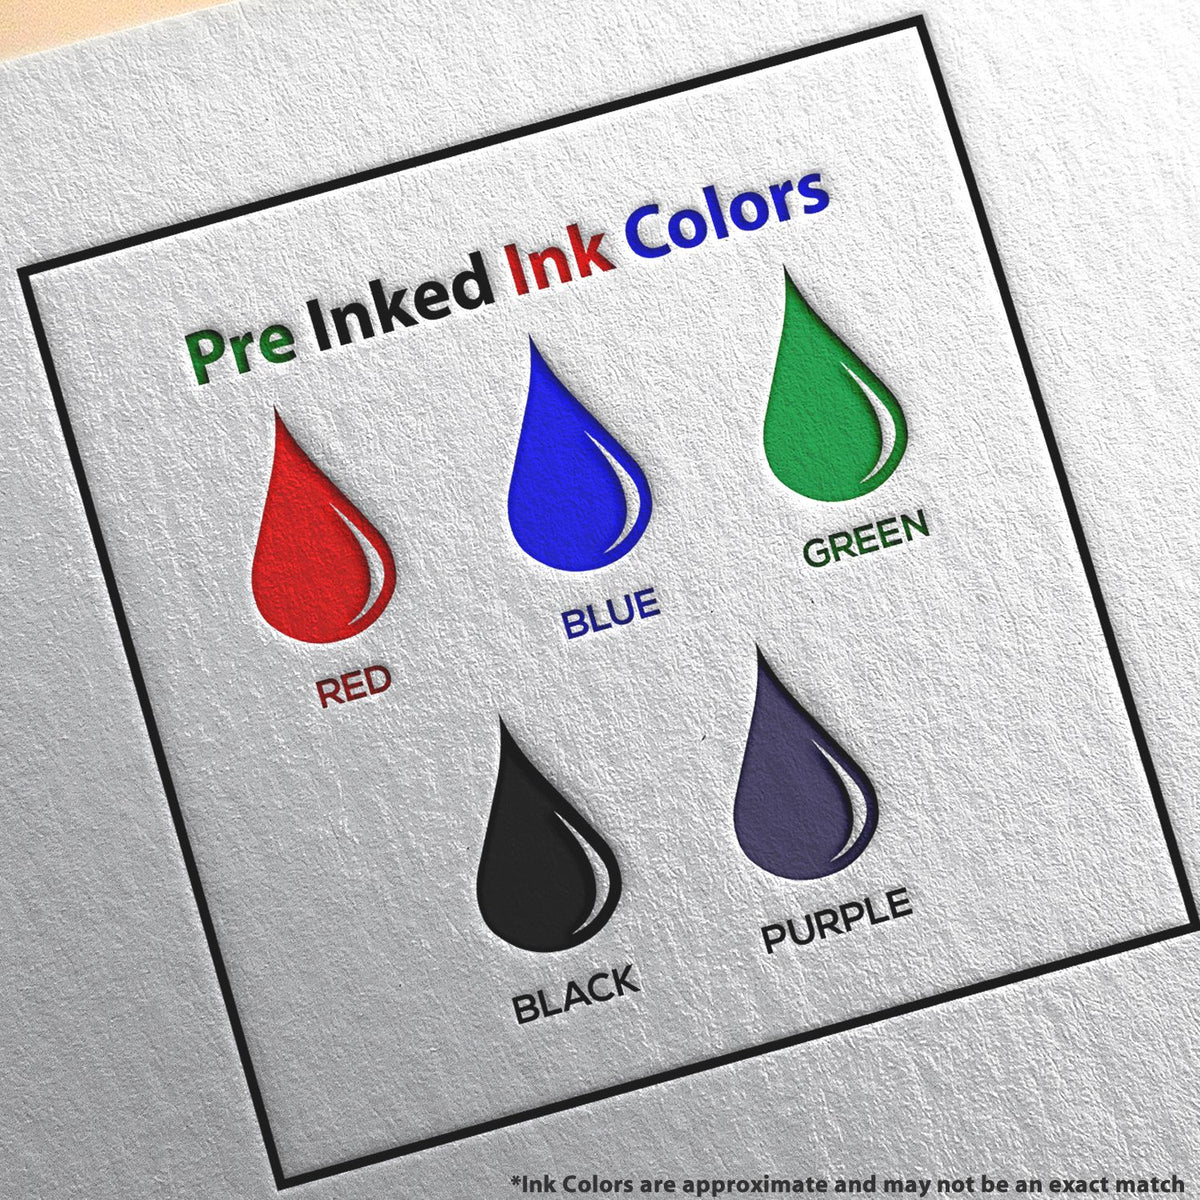 A picture showing the different ink colors or hues available for the MaxLight Premium Pre-Inked Florida Rectangular Notarial Stamp product.